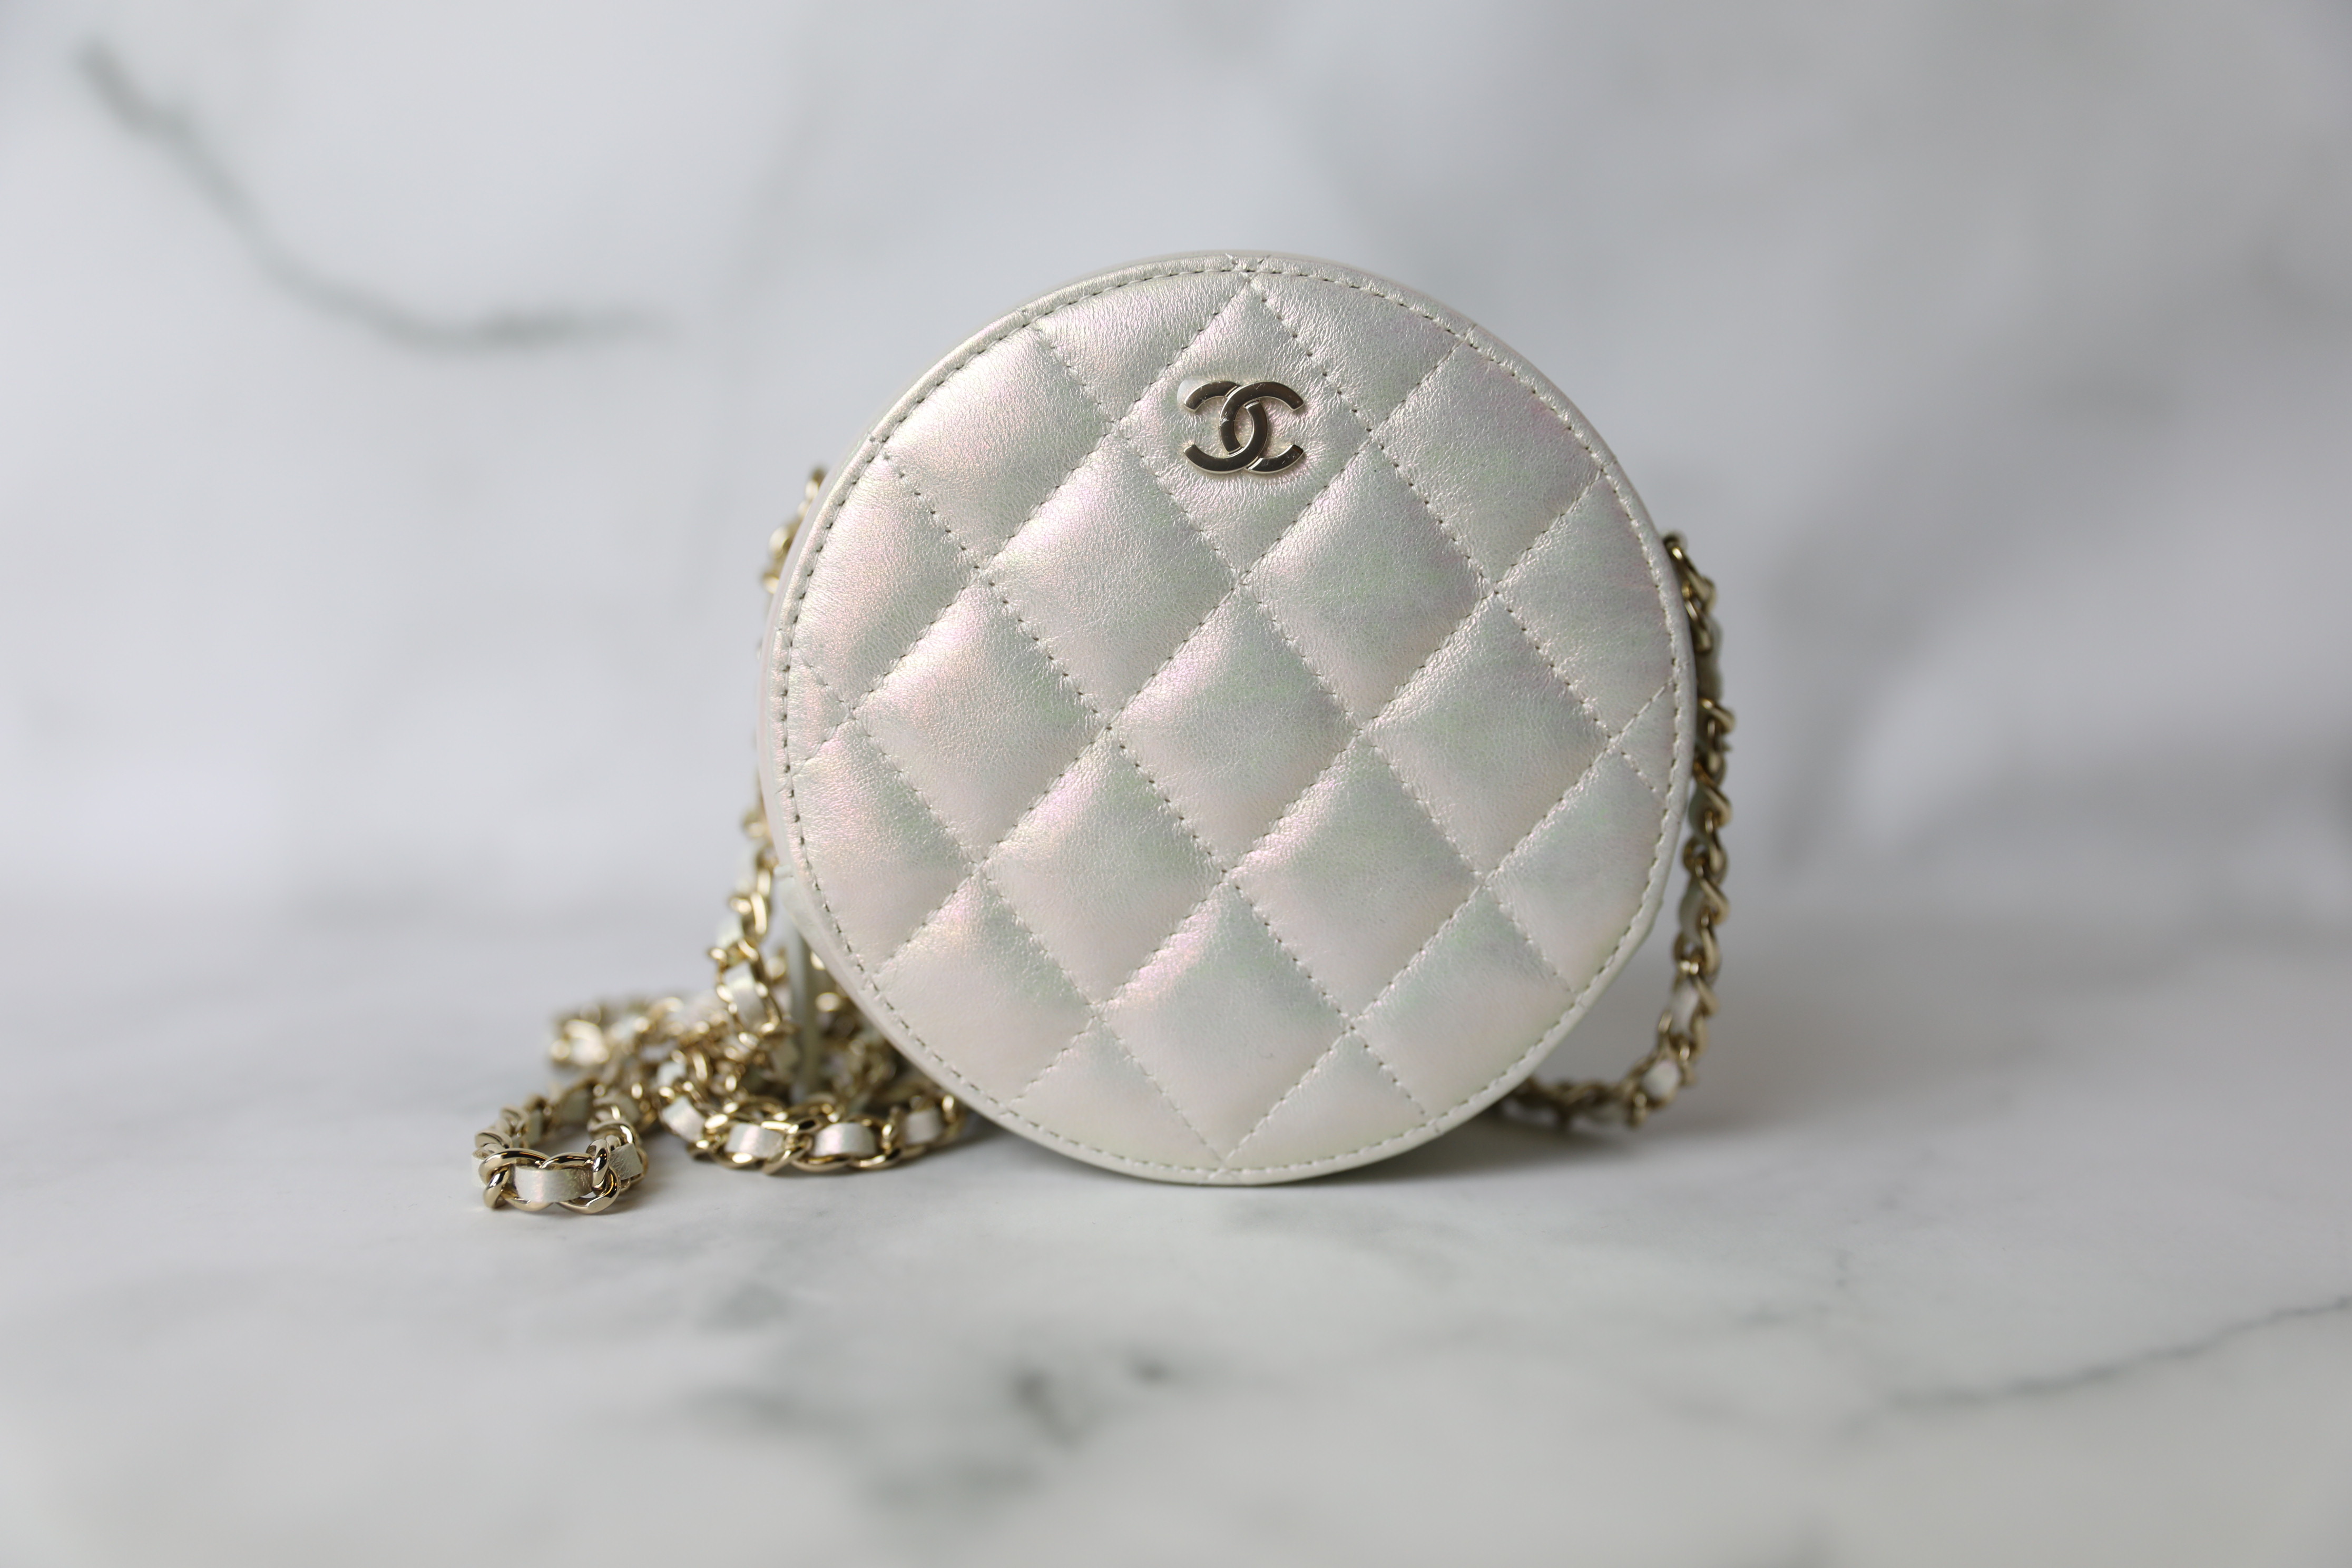 Chanel - Round Clutch with Chain - Silver Iridescent Lambskin CGHW - Mint